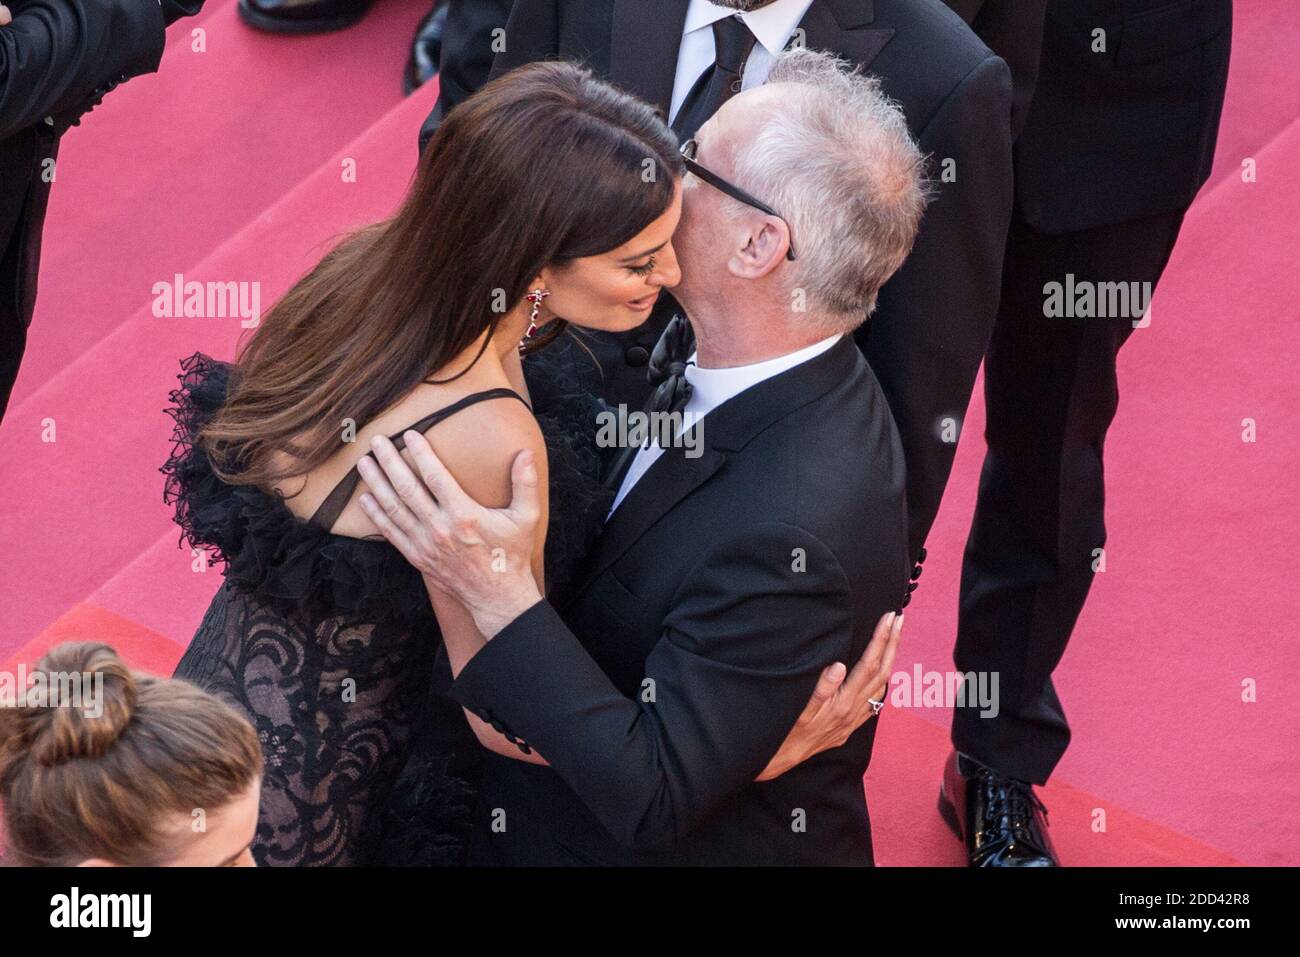 Penelope Cruz, Thierry Fremont on the red carpet at opening ceremony during 71st Cannes film festival on May 08, 2018 in Cannes, France. Photo by Nasser Berzane/ABACAPRESS.COM Stock Photo